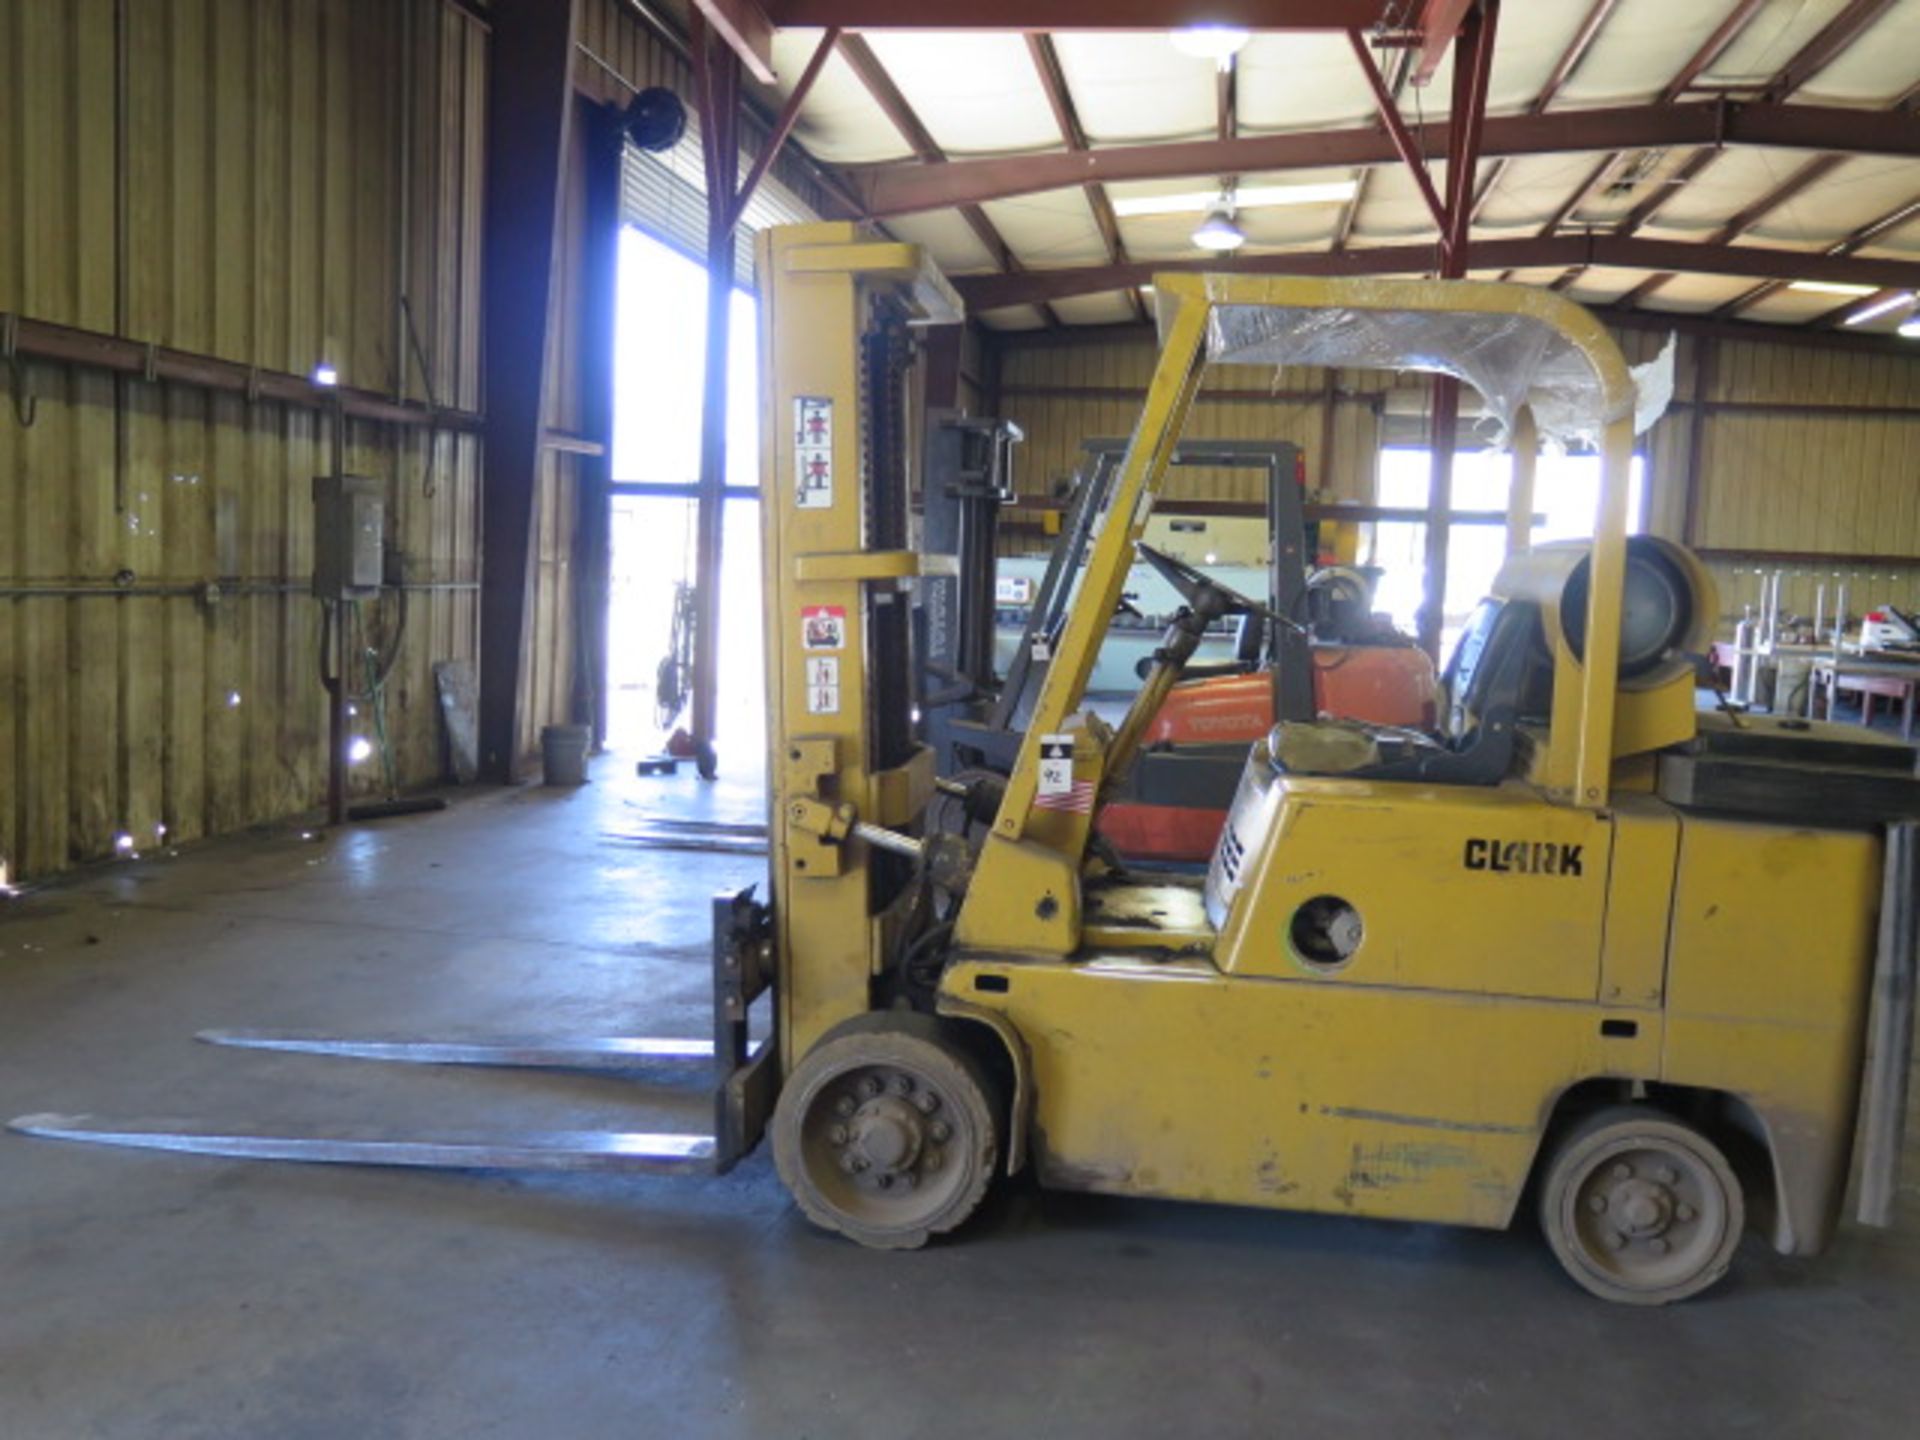 Clark C500-80 7250 Lb Cap LPG Forklift s/n 685-285-22511072 w/ 3-Stage, 180" Lift Height, SOLD AS IS